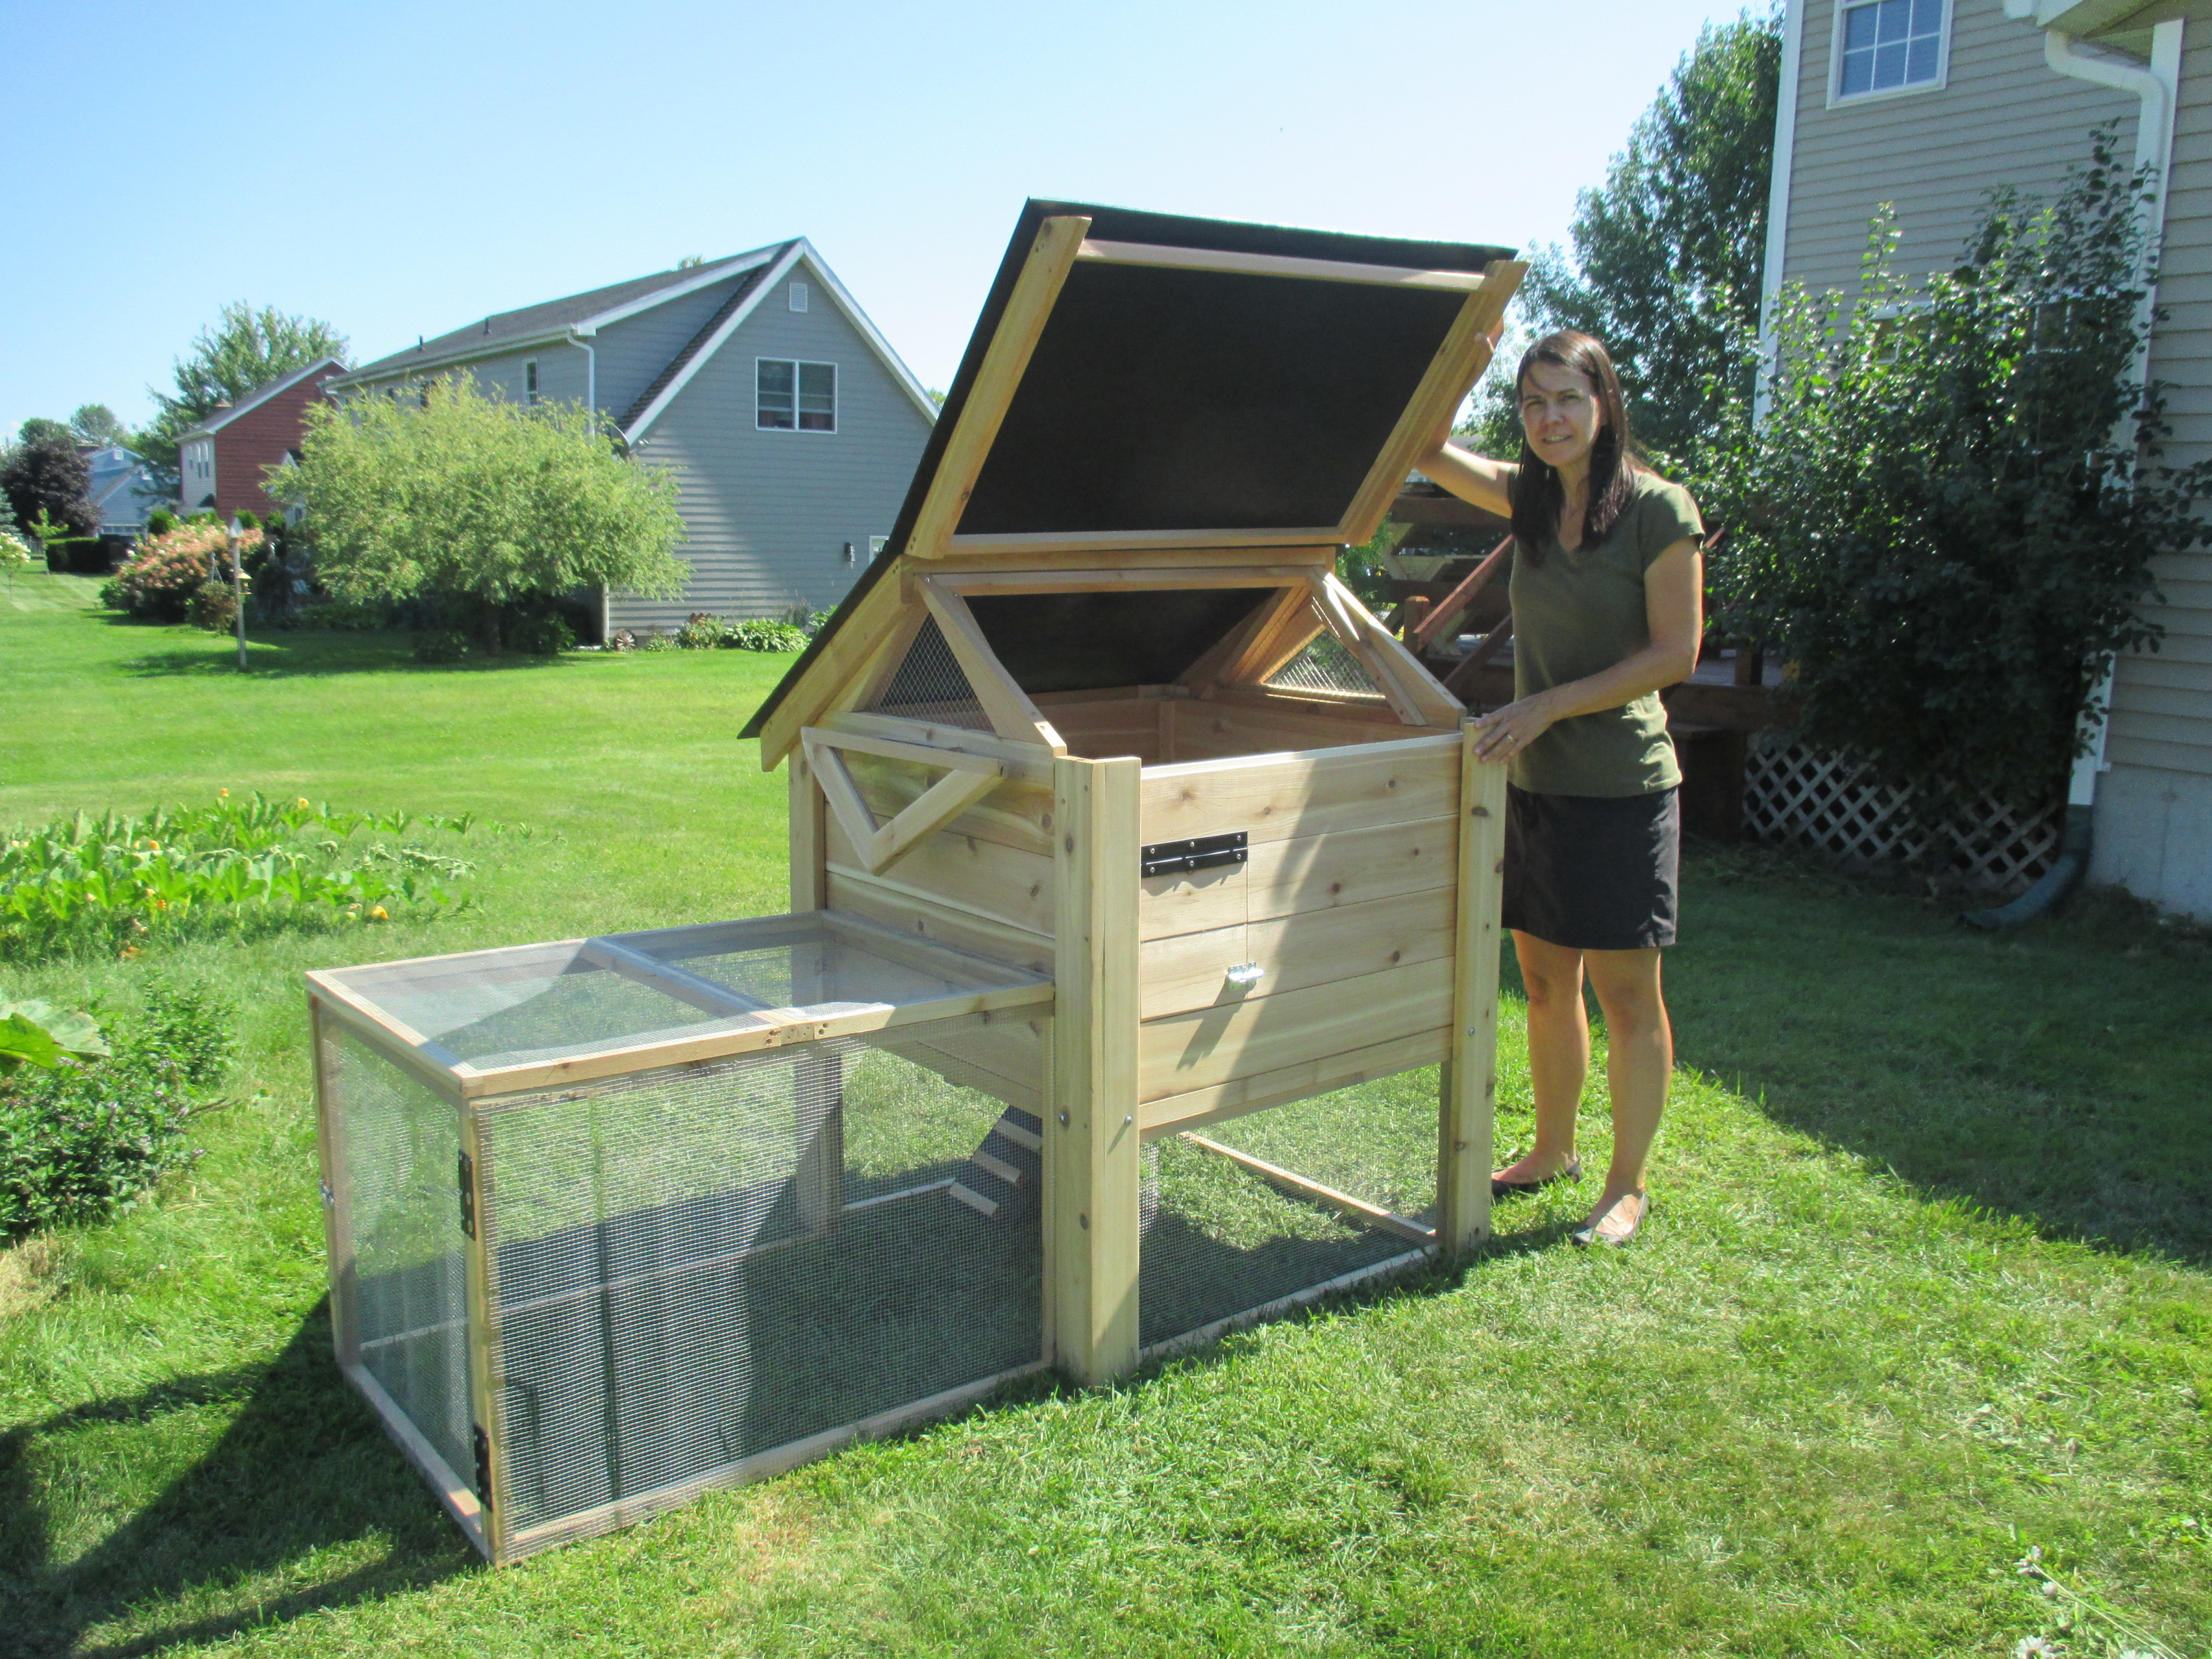 The Ultimate Backyard Chicken Coop with Run by Infinite Cedar